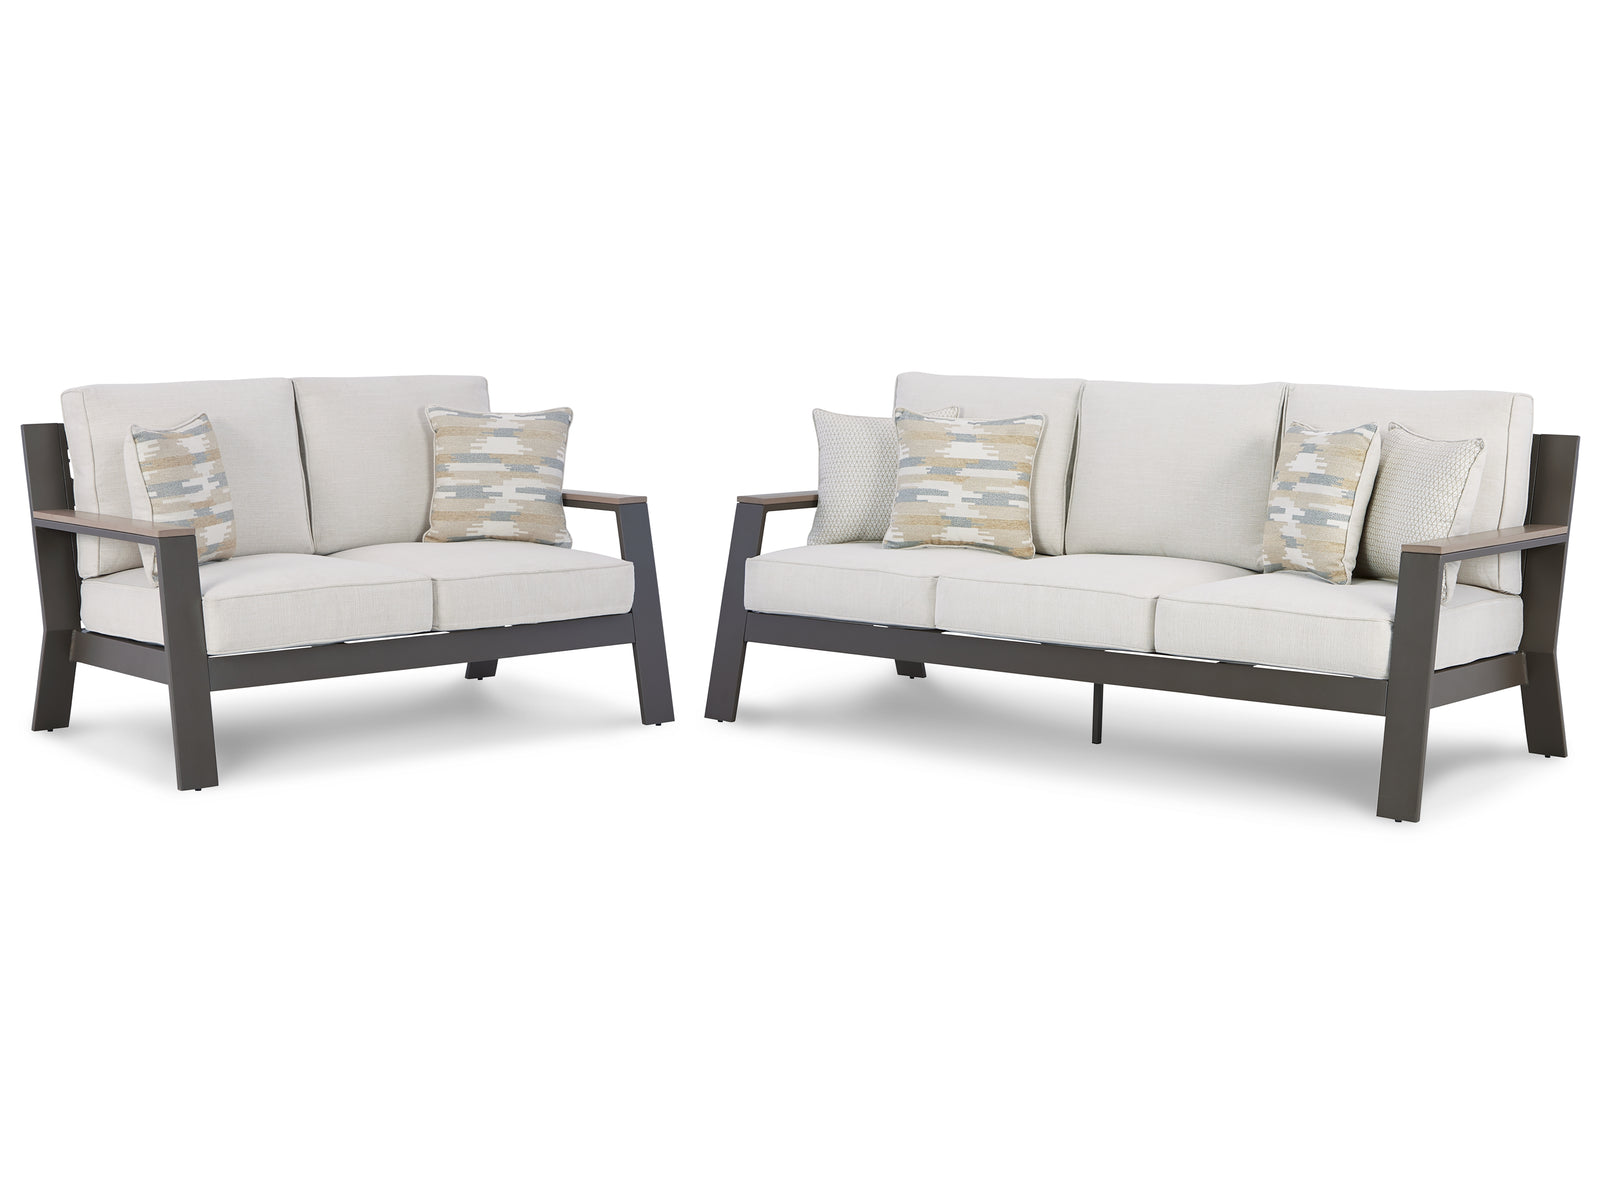 Tropicava Taupe/white Outdoor Sofa And Loveseat